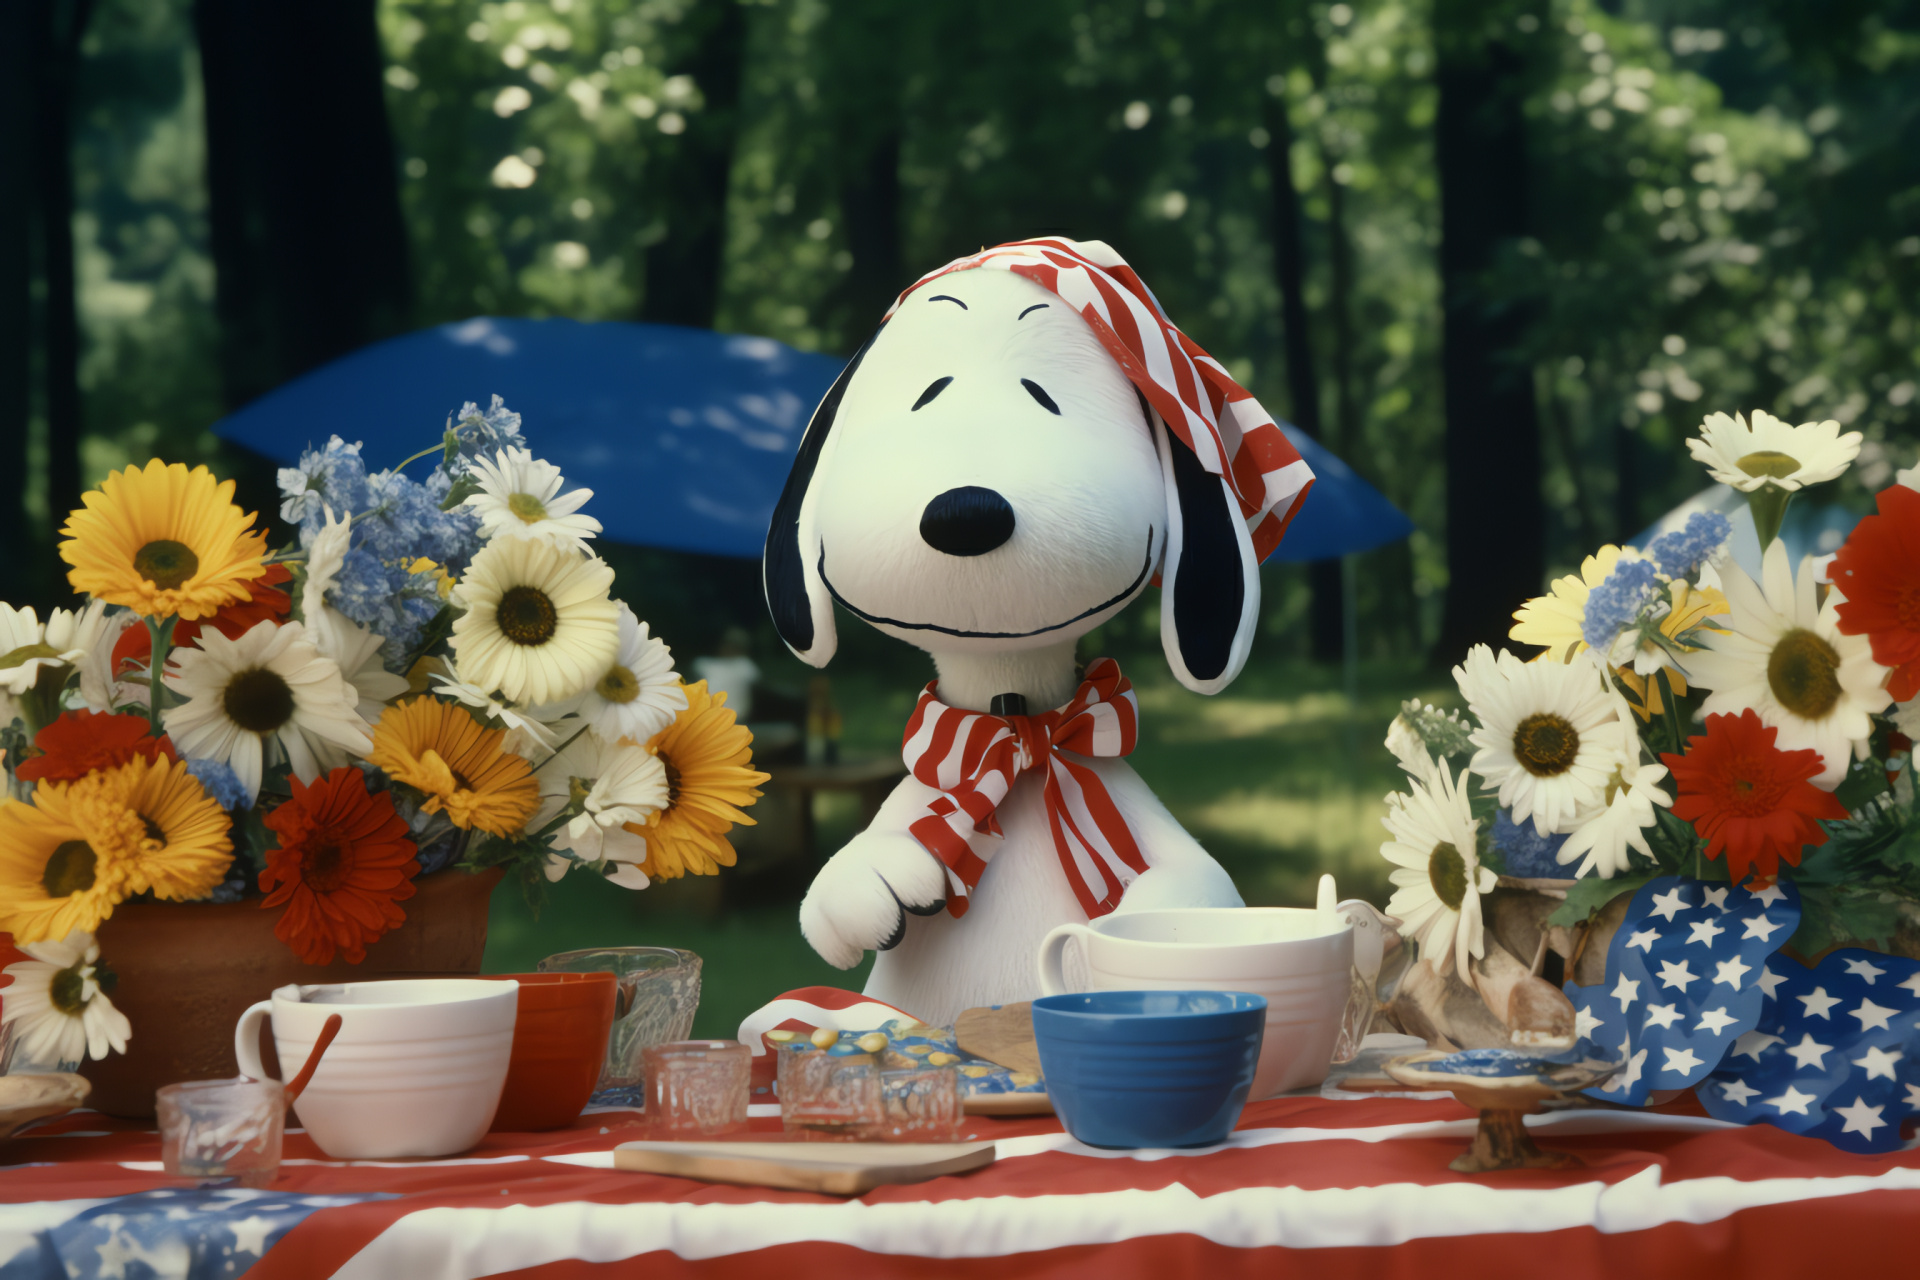 Snoopy picnic, Independence Day, outdoor festivity, public garden, July 4th, HD Desktop Image